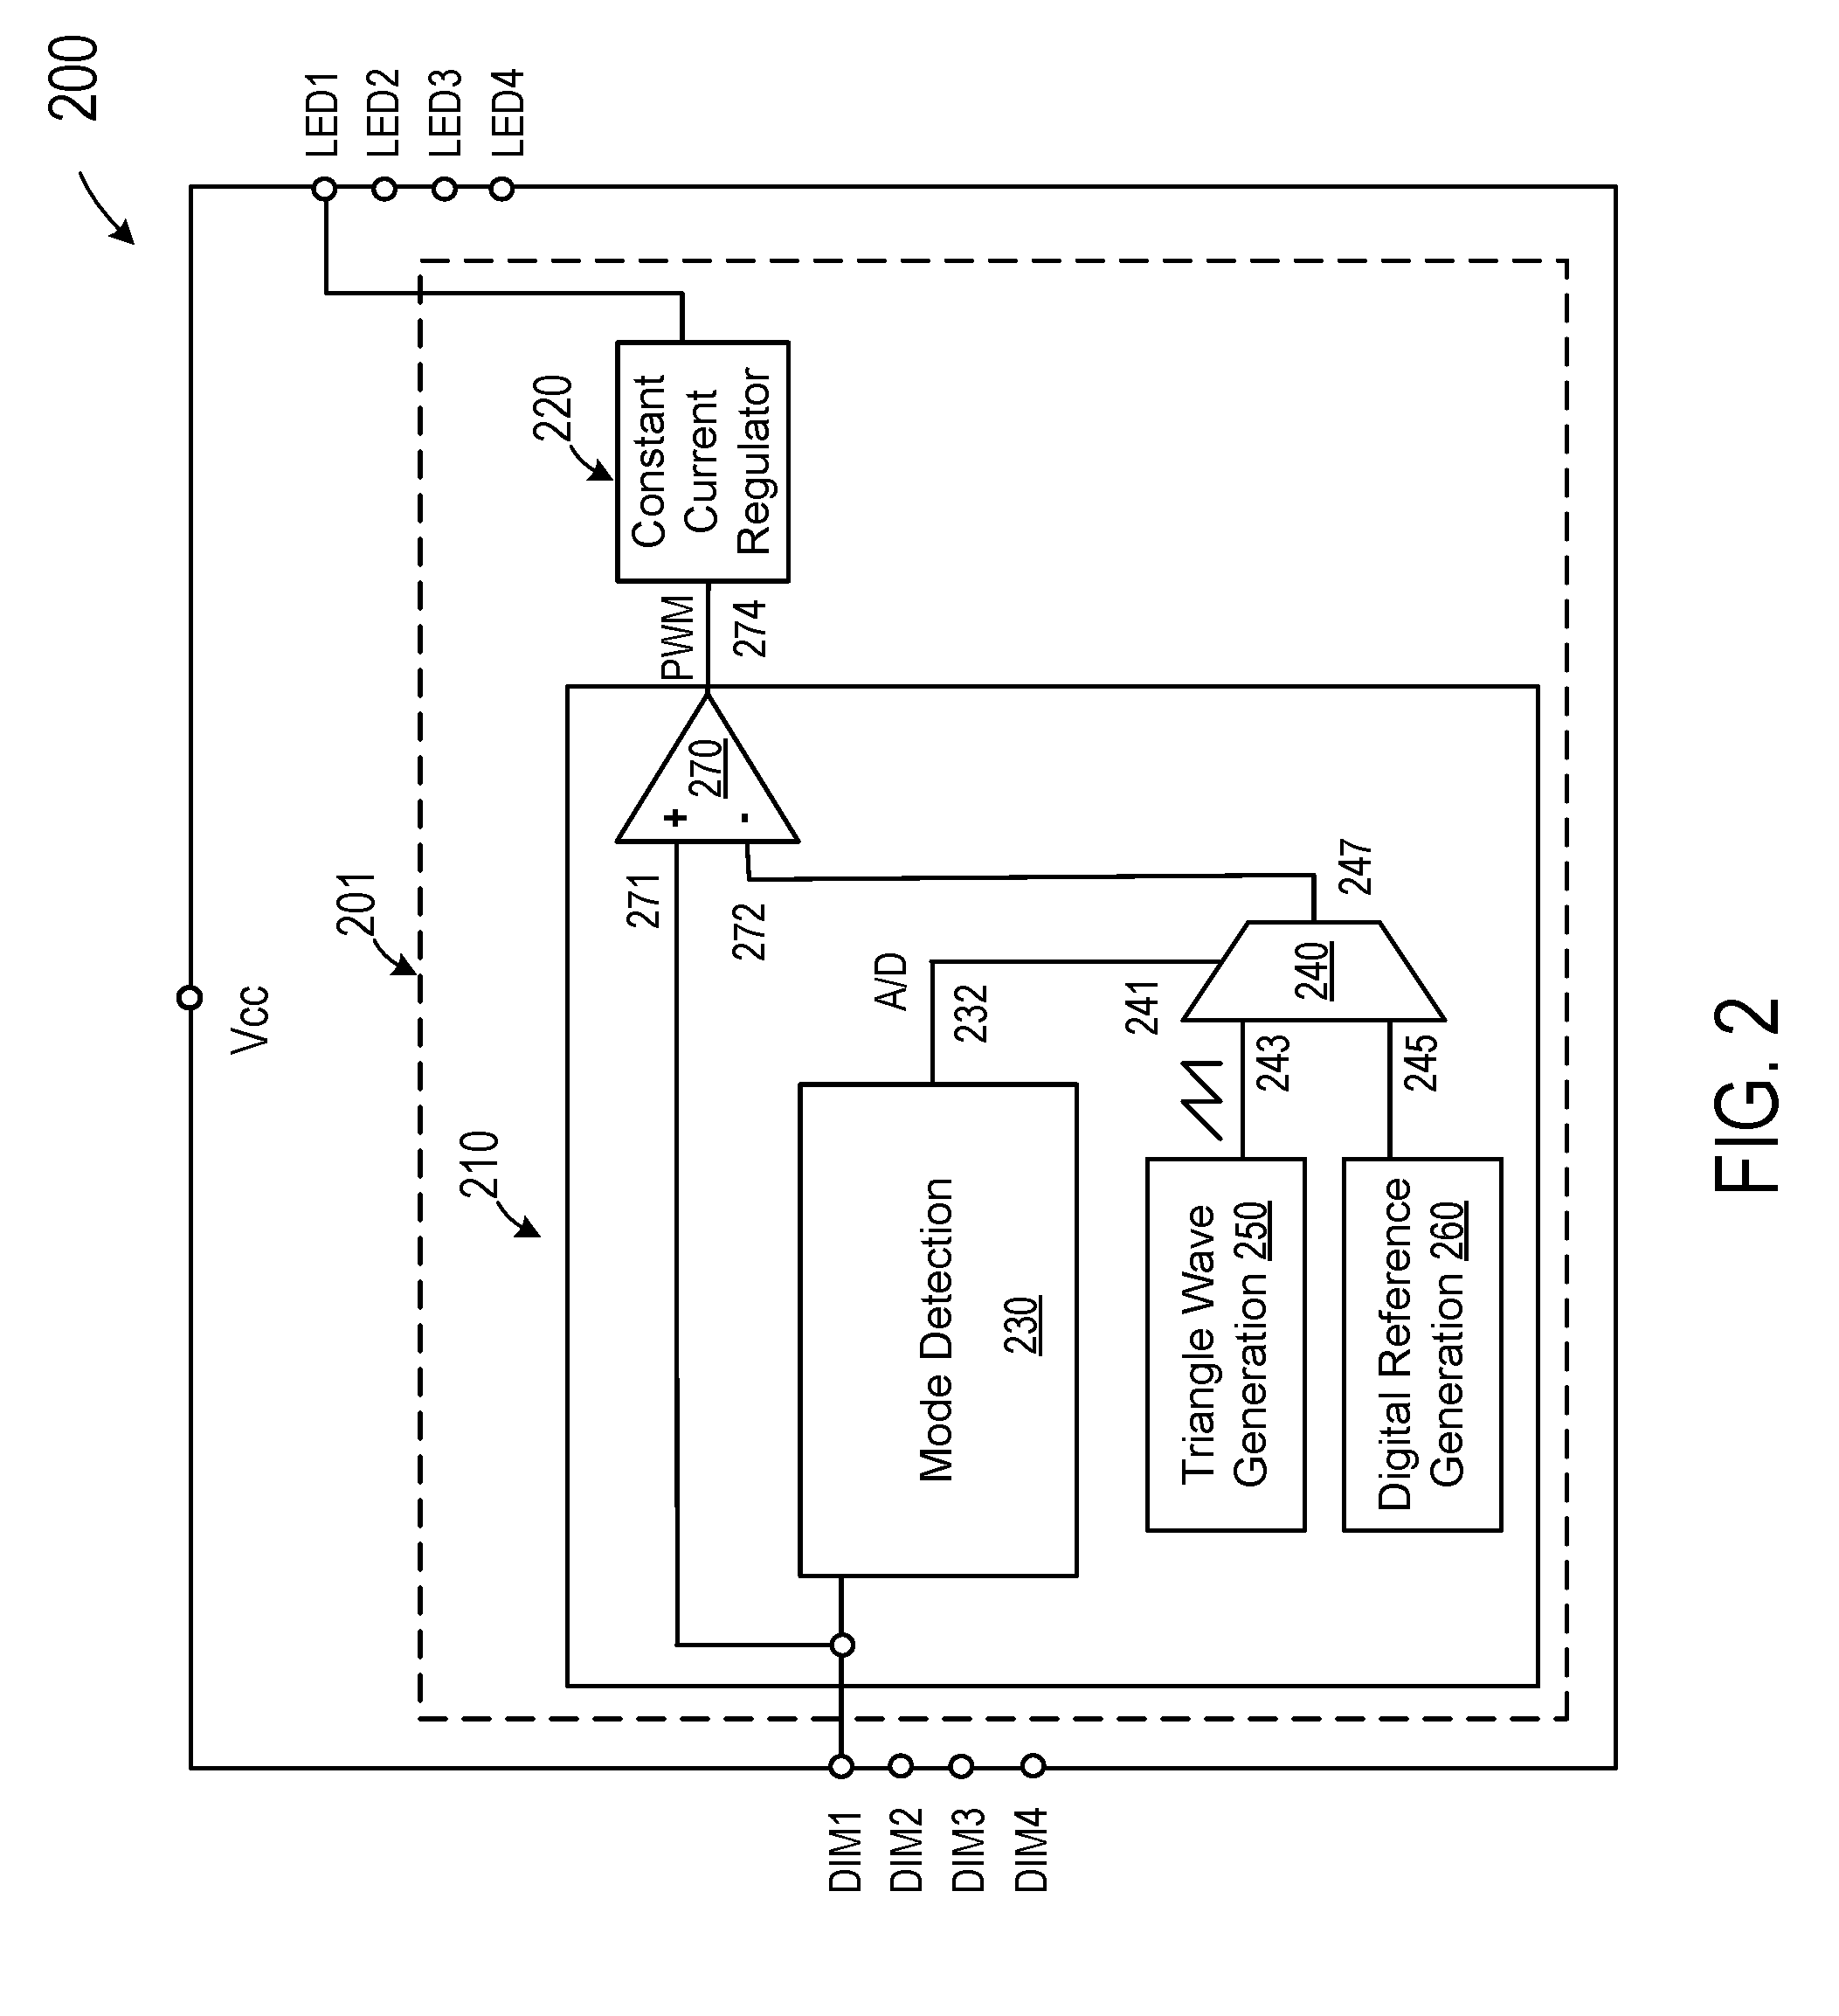 Analog and digital dimming control for LED driver